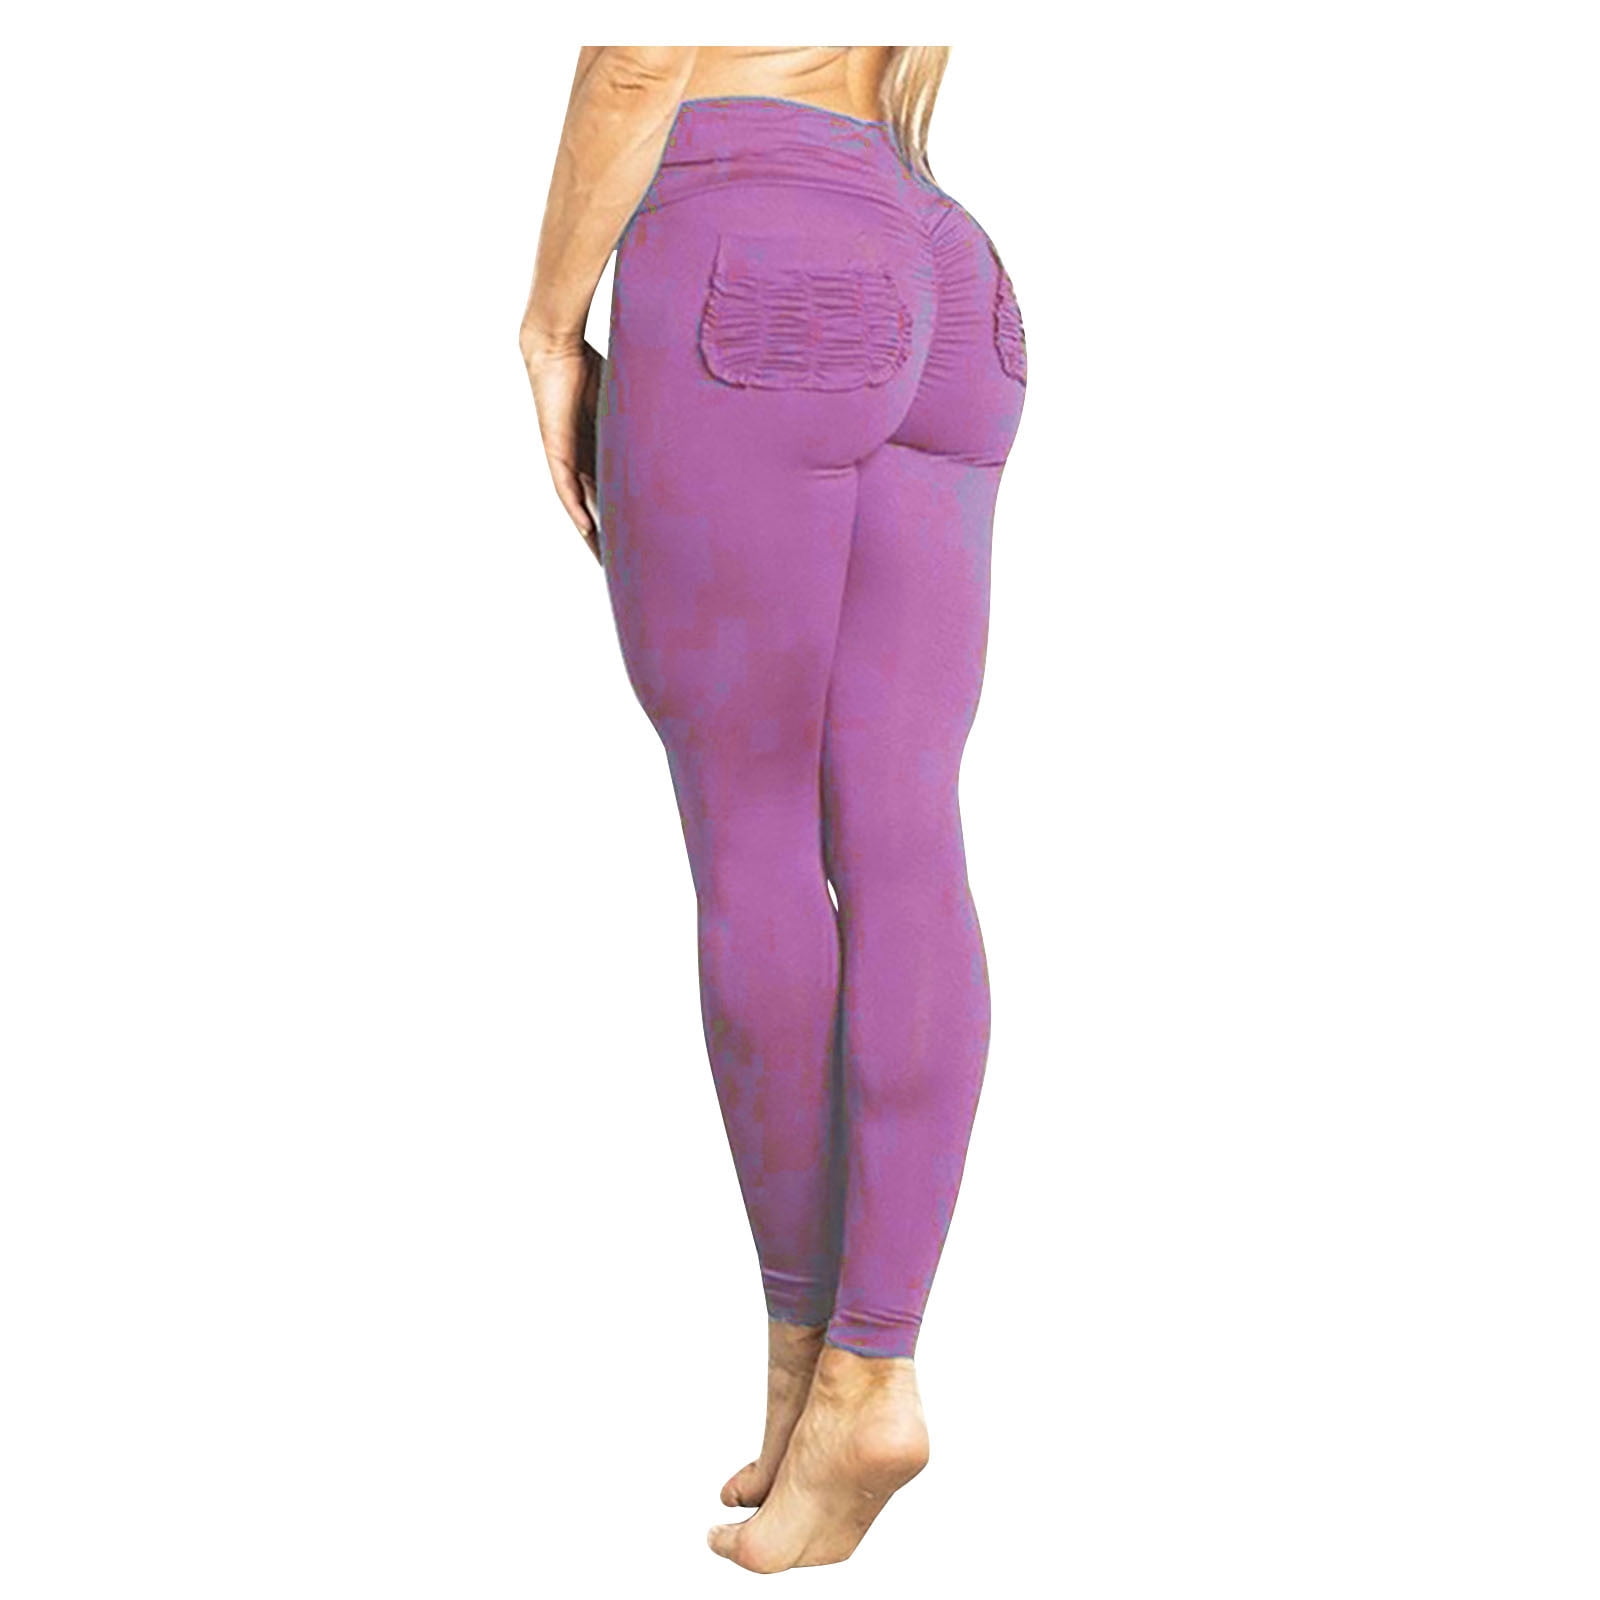 JNGSA Thick High Waist Yoga Pants with Pockets, Control Tummy Workout  Skinny Running Yoga Leggings for Women Purple 8 